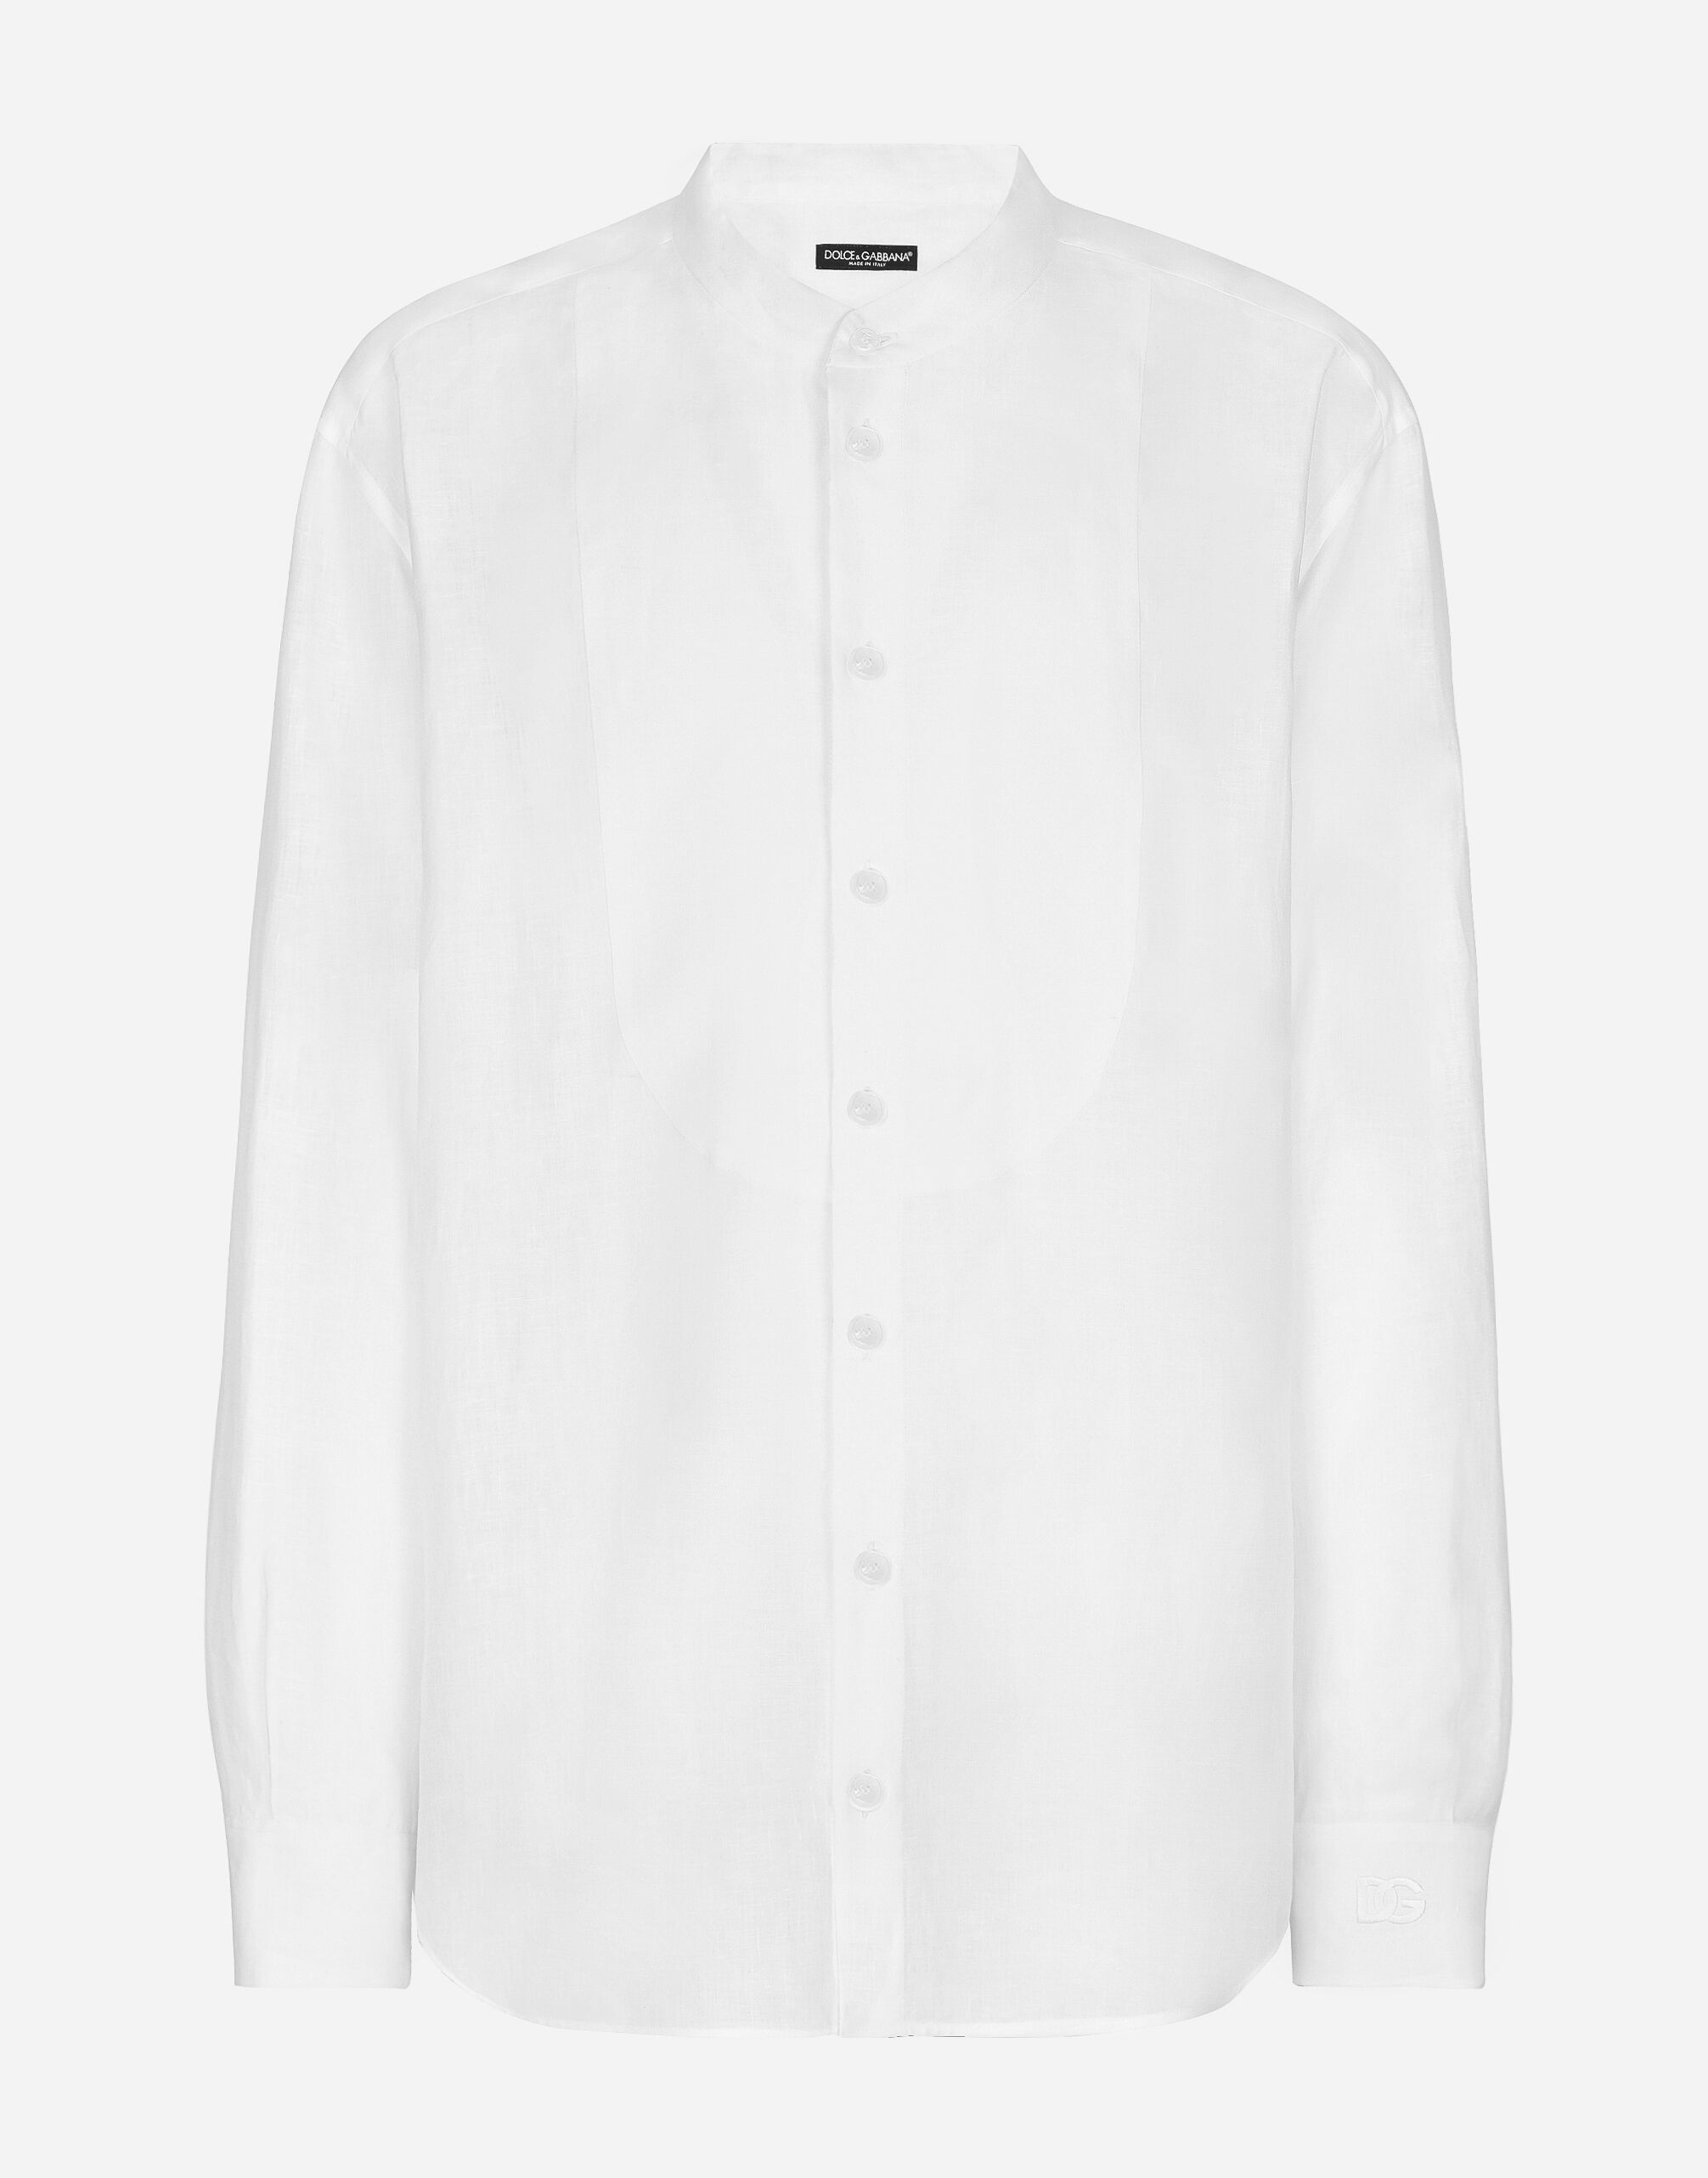 Dolce & Gabbana Linen shirt with DG embroidery and shirt-front detail Black G2RR6TFUBGC